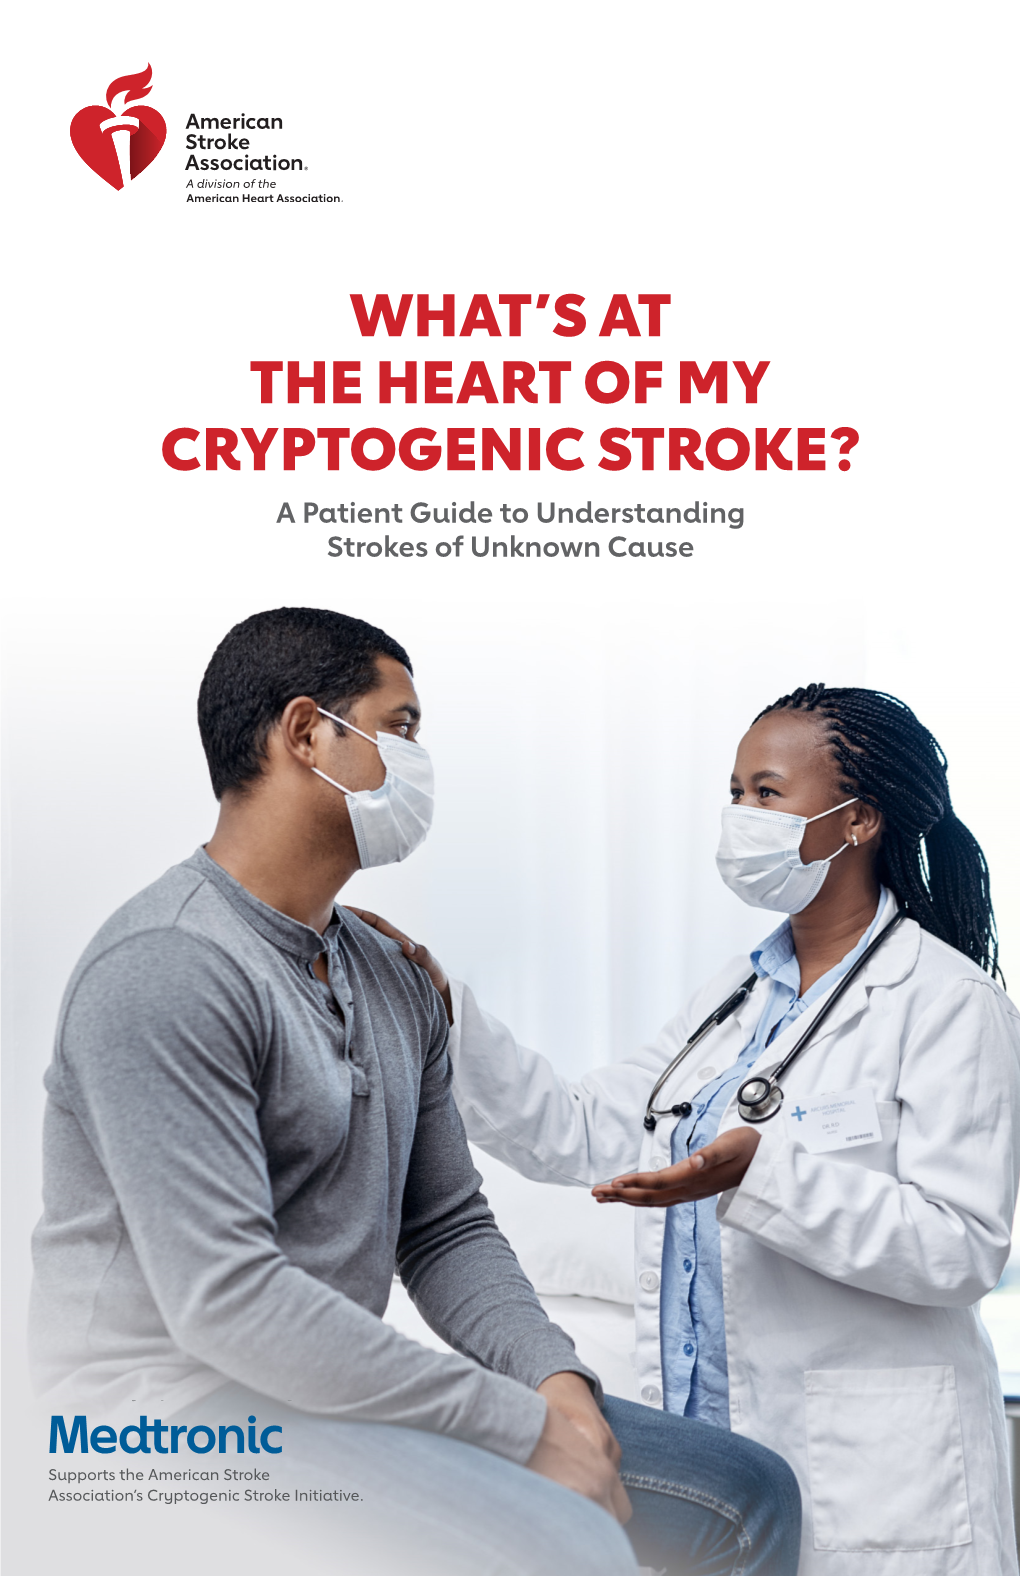 What's at the Heart of My Cryptogenic Stroke?